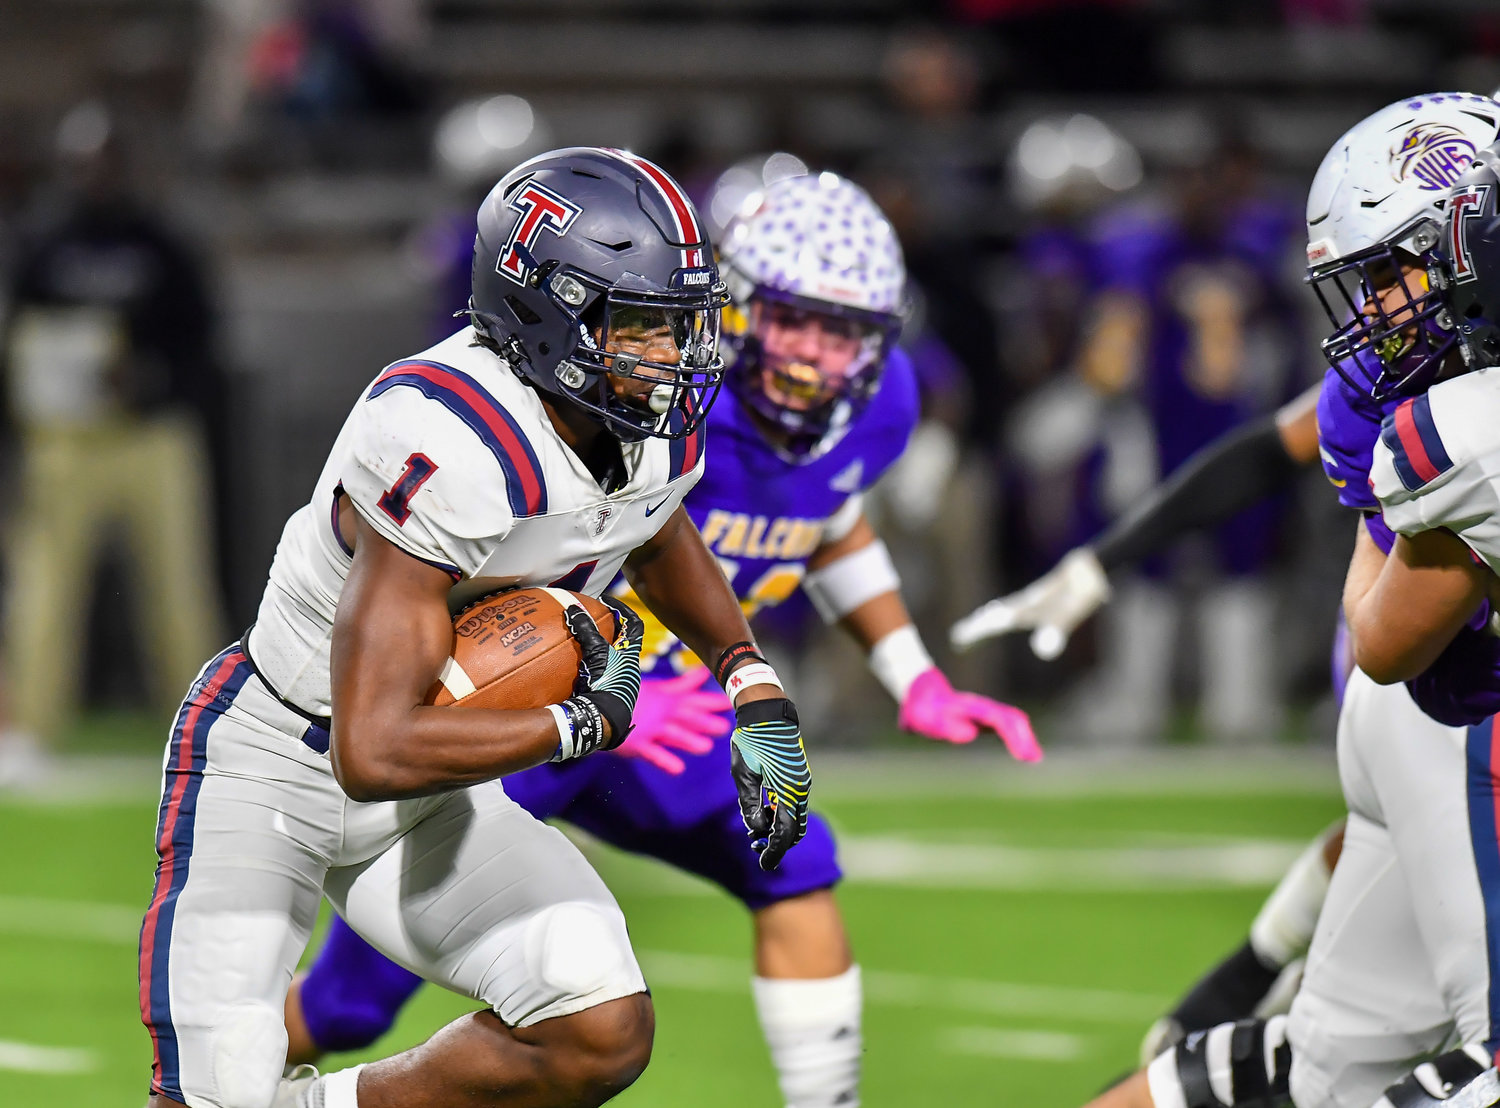 Houston Tx. Nov 19, 2021: Tompkins #1 Caleb Komolafe carries the ball during the UIL area playoff game between Tompkins and Jersey Village at Pridgeon Stadium in Houston. (Photo by Mark Goodman / Katy Times)